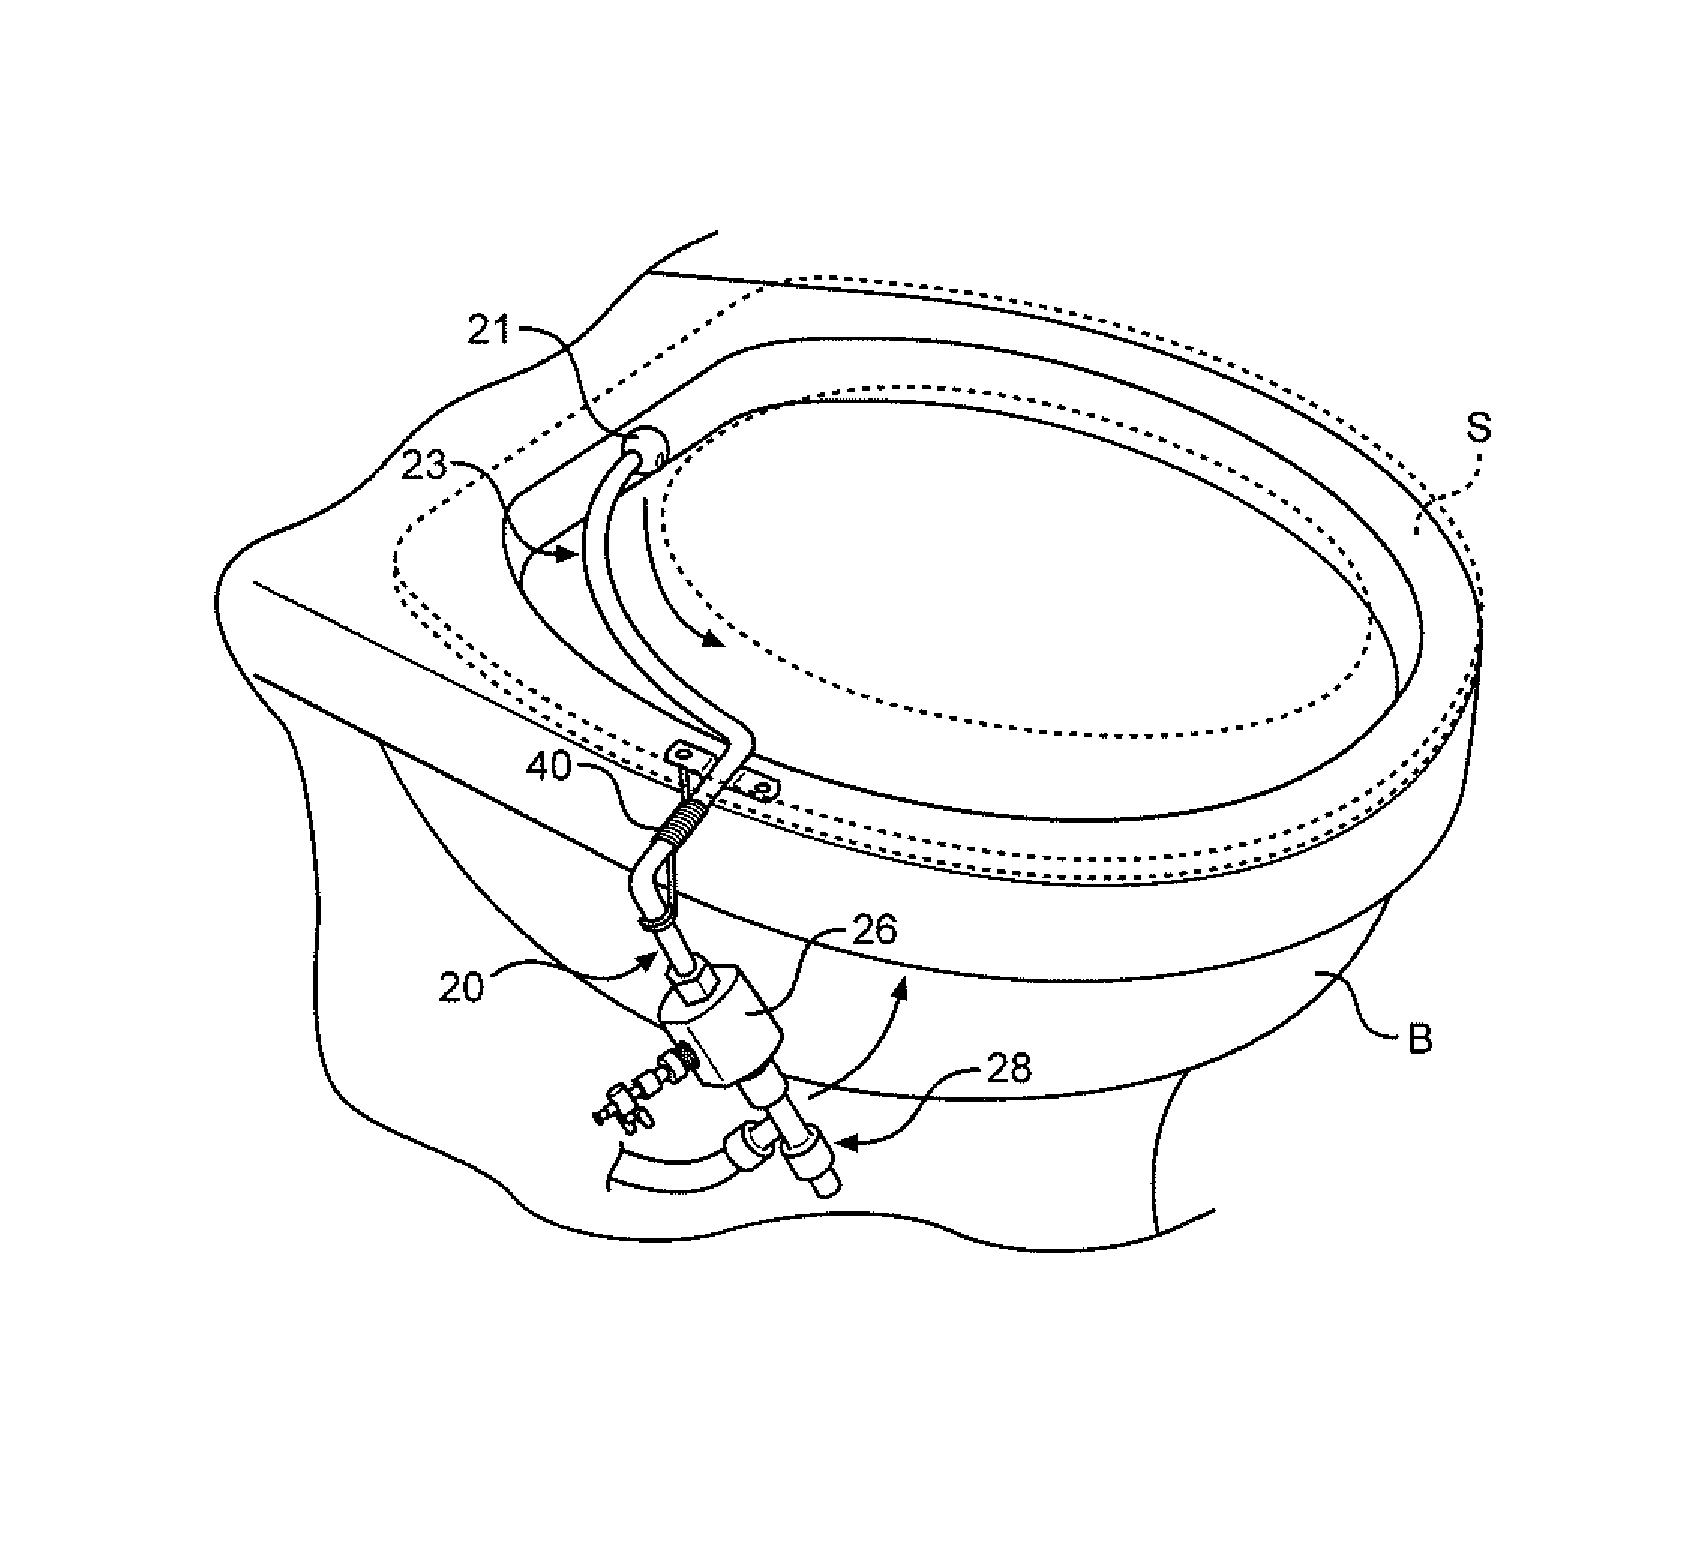 Perineal spray attachment for toilets